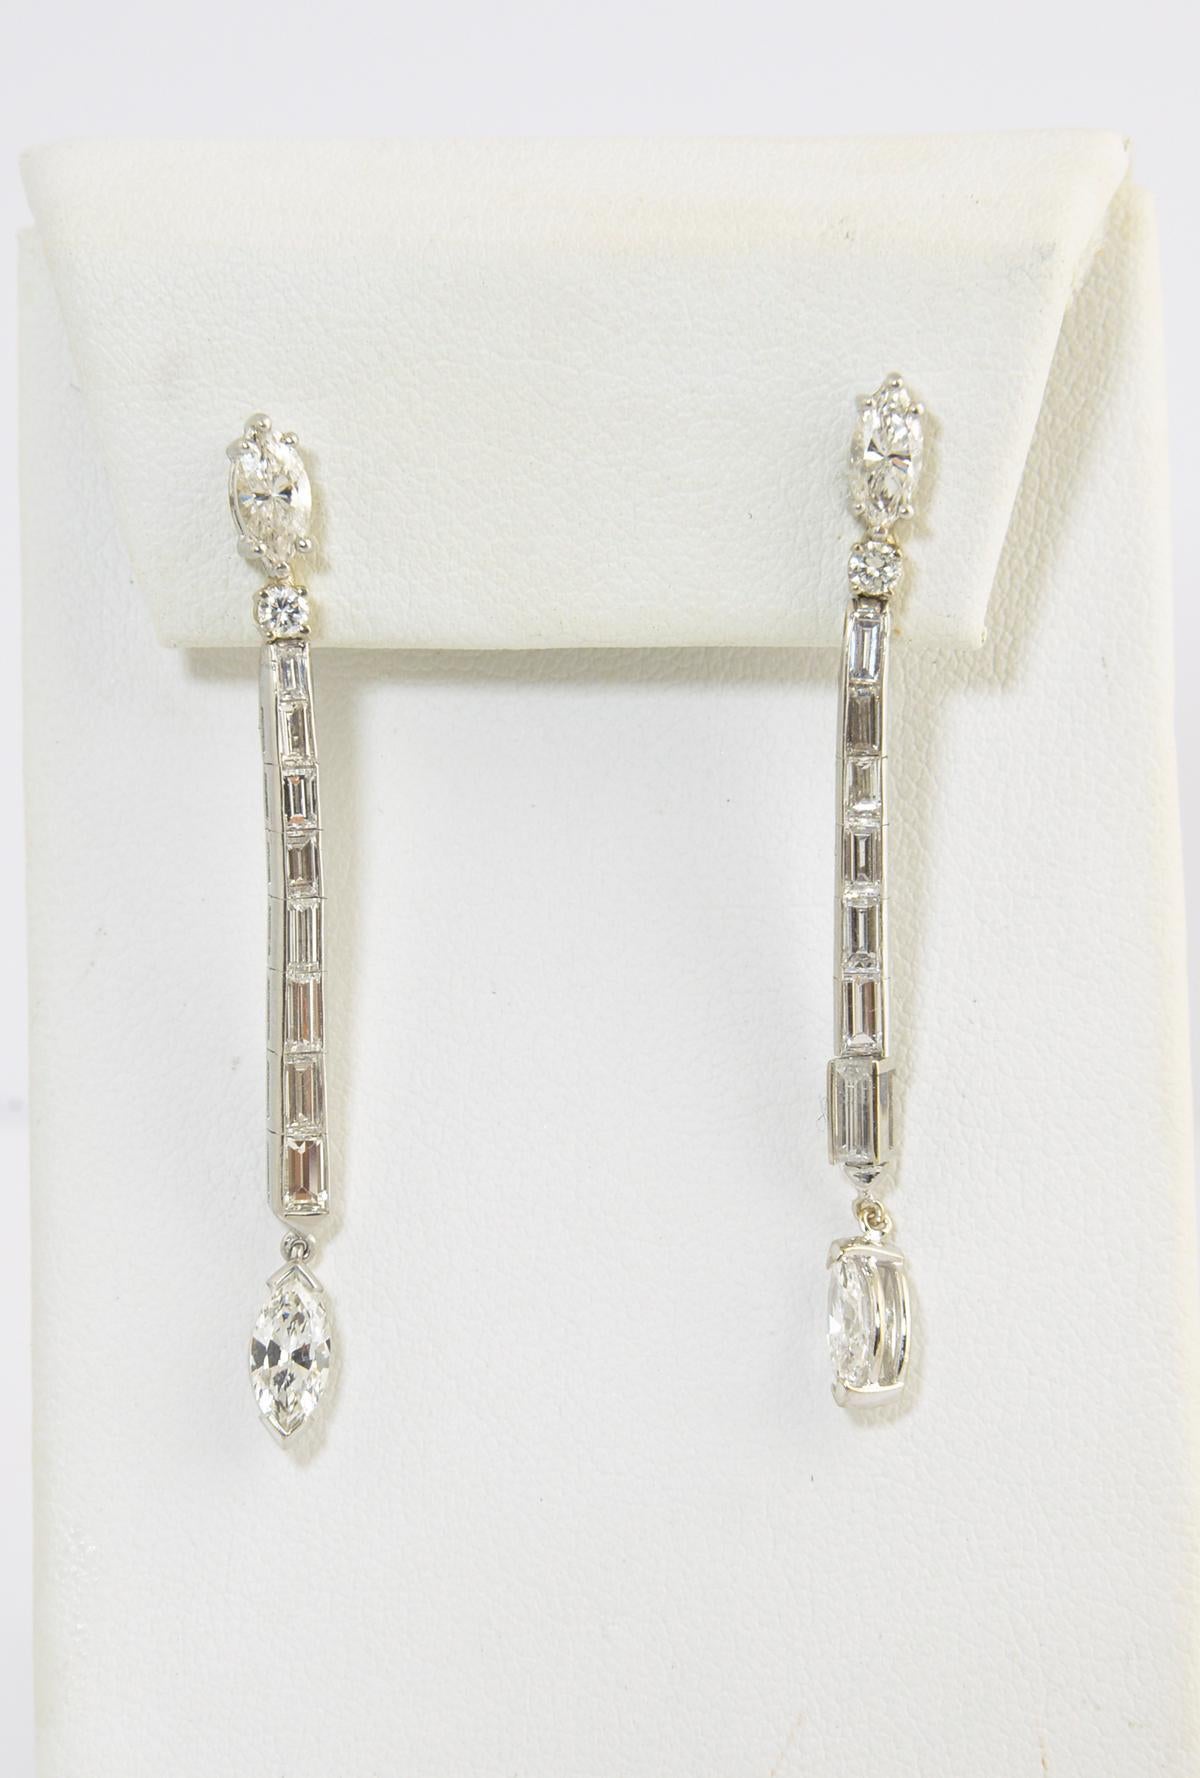 Long dangle diamond pierce post back earrings. The top and middle section are platinum.  The mount for the bottom stones and the backs are 14K white gold. Diamonds, approximately 4.2 carat total weight; top two diamonds, 1 carat total; bottom two